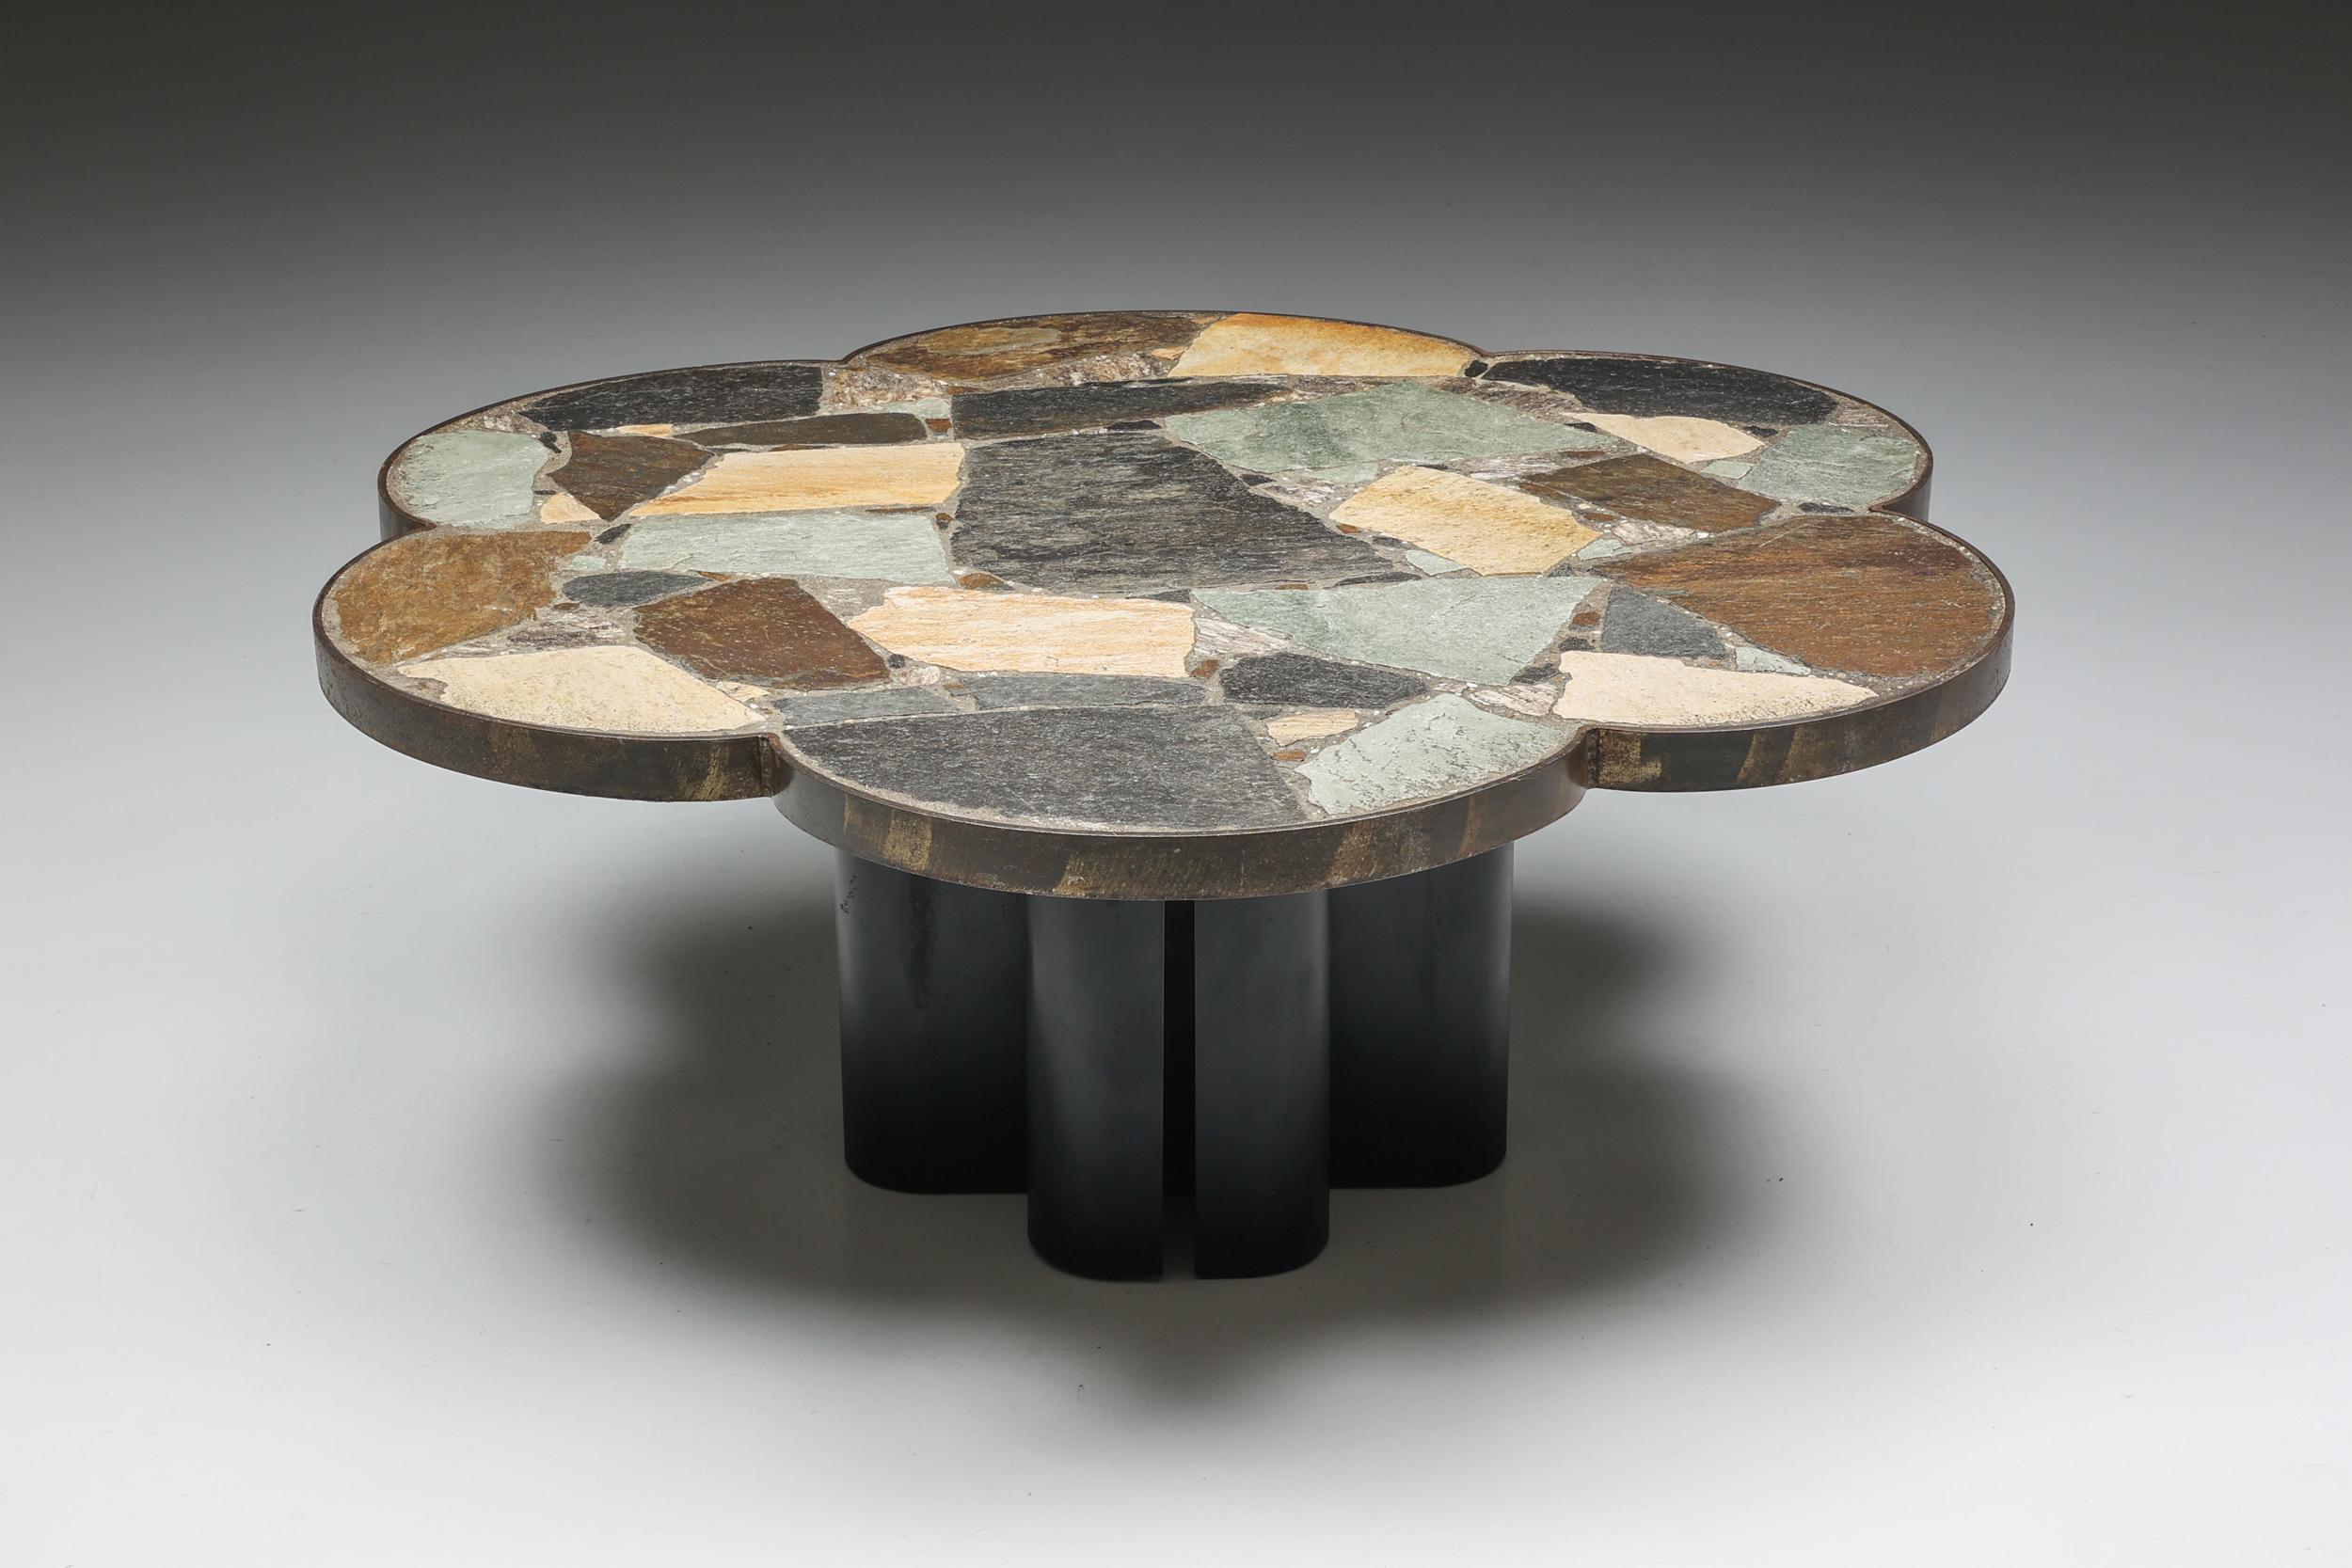 Mosaic Stone Flower Shaped Coffee Table, Mid-Century Modern, Italy, 1950's